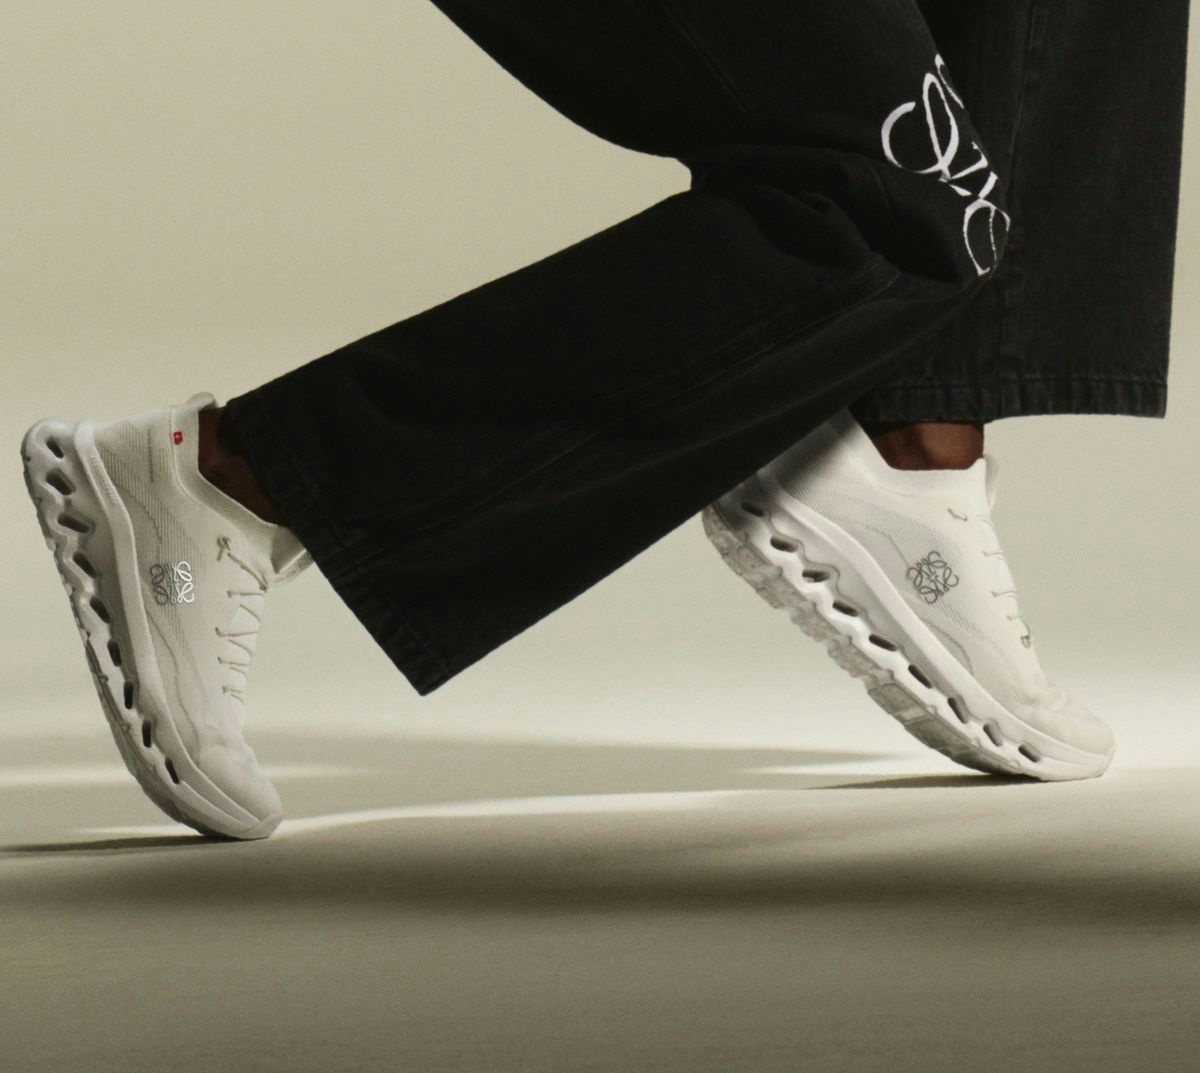 The Cloudtilt is the first of On's lifestyle sneakers to use CloudTec Phase, a precision-engineered midsole. Photo: Loewe